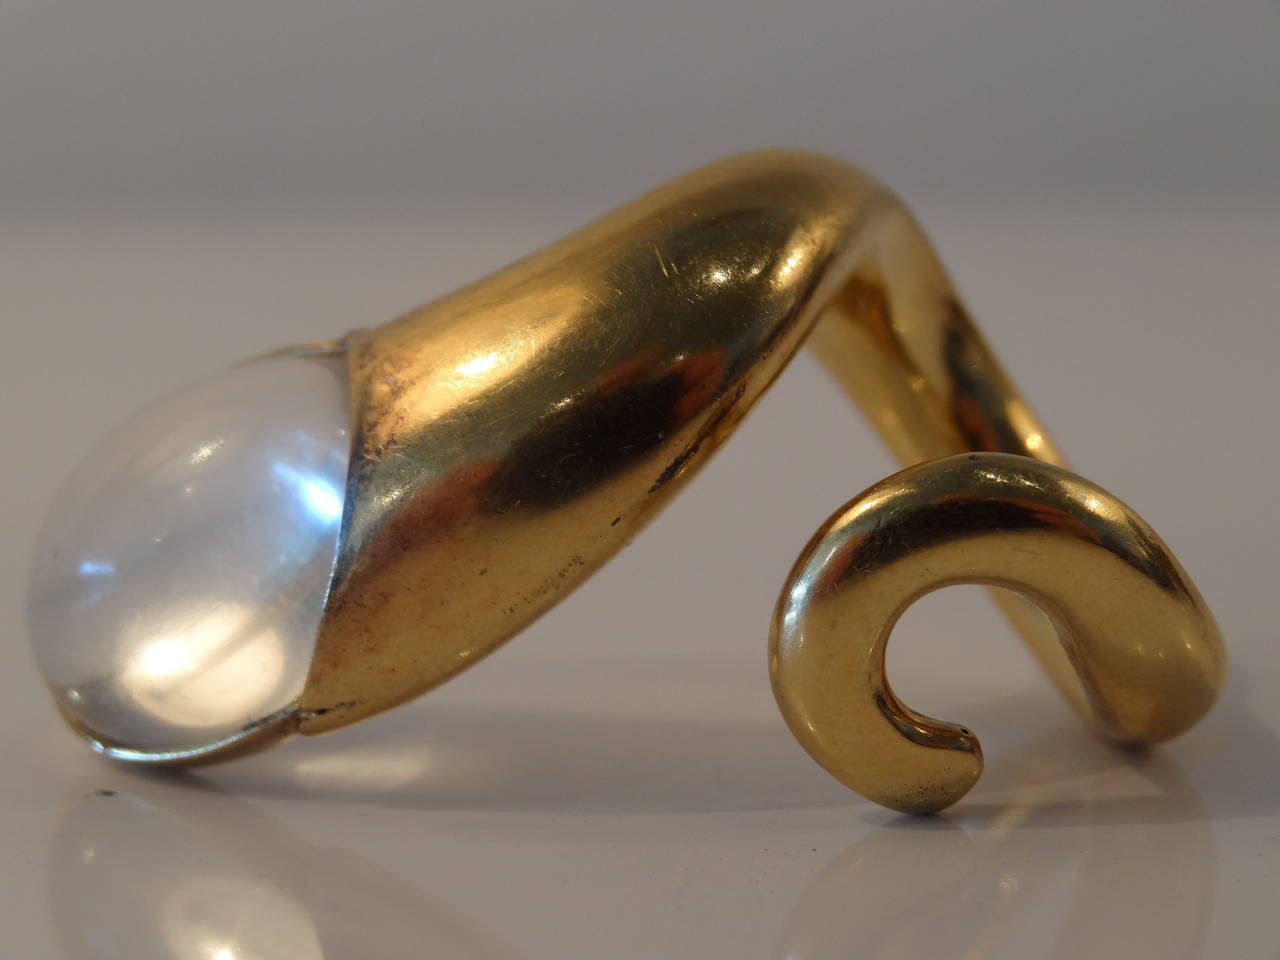 A beautifully designed ring of 18kt gold and inset with a cabachon crystal.Possibly rock crystal.
Ring appears to be handcrafted.
Clasisic yet modern in design.
Ring is a ladies size 6
9.24 dwt
Incredible quality.